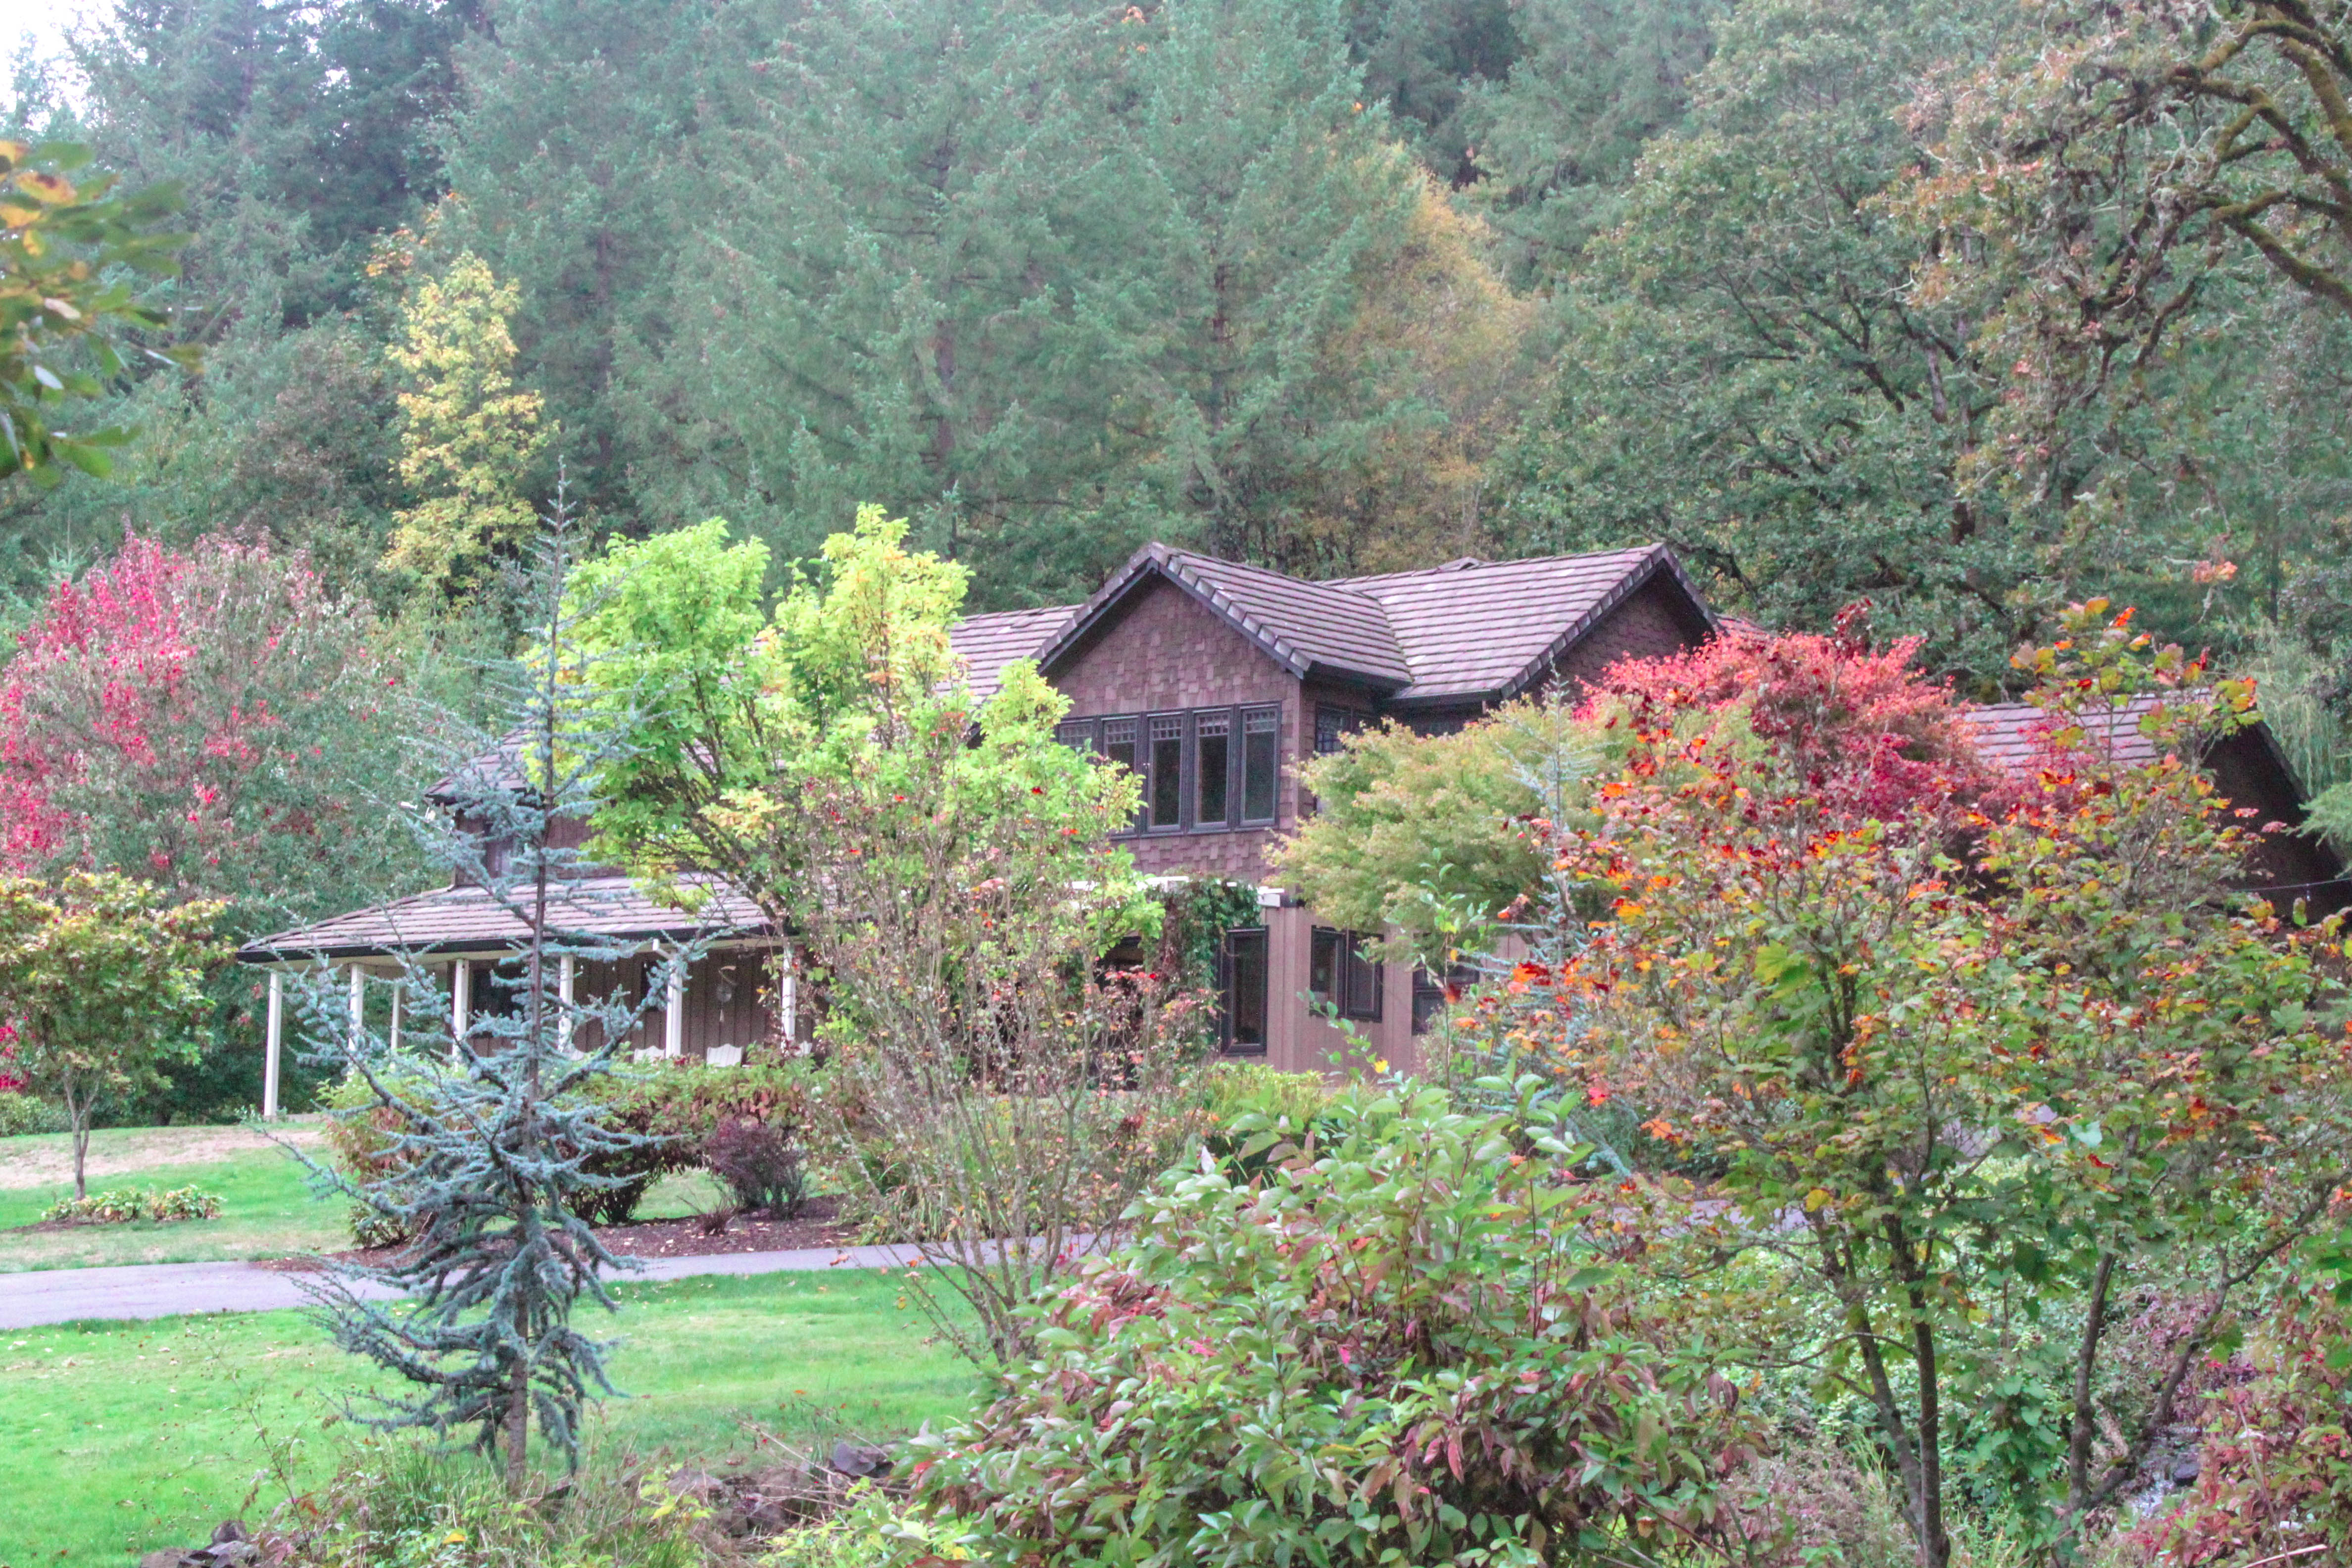 Oregon Wine Country Escape: The Brookside Inn